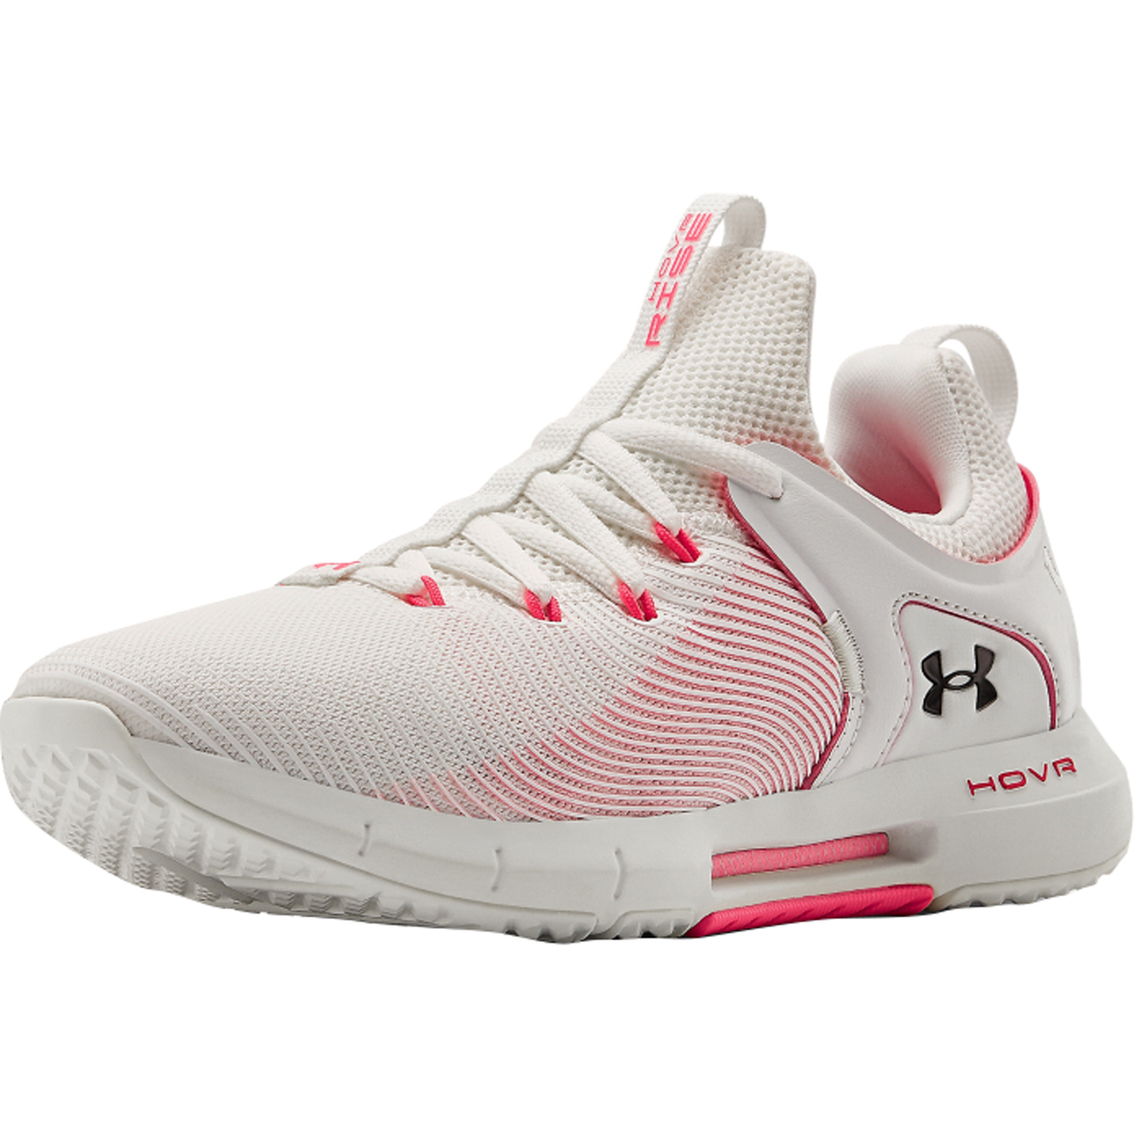 Under Armour Women's Hovr Rise 2 Training Shoes | Running | Shoes ...